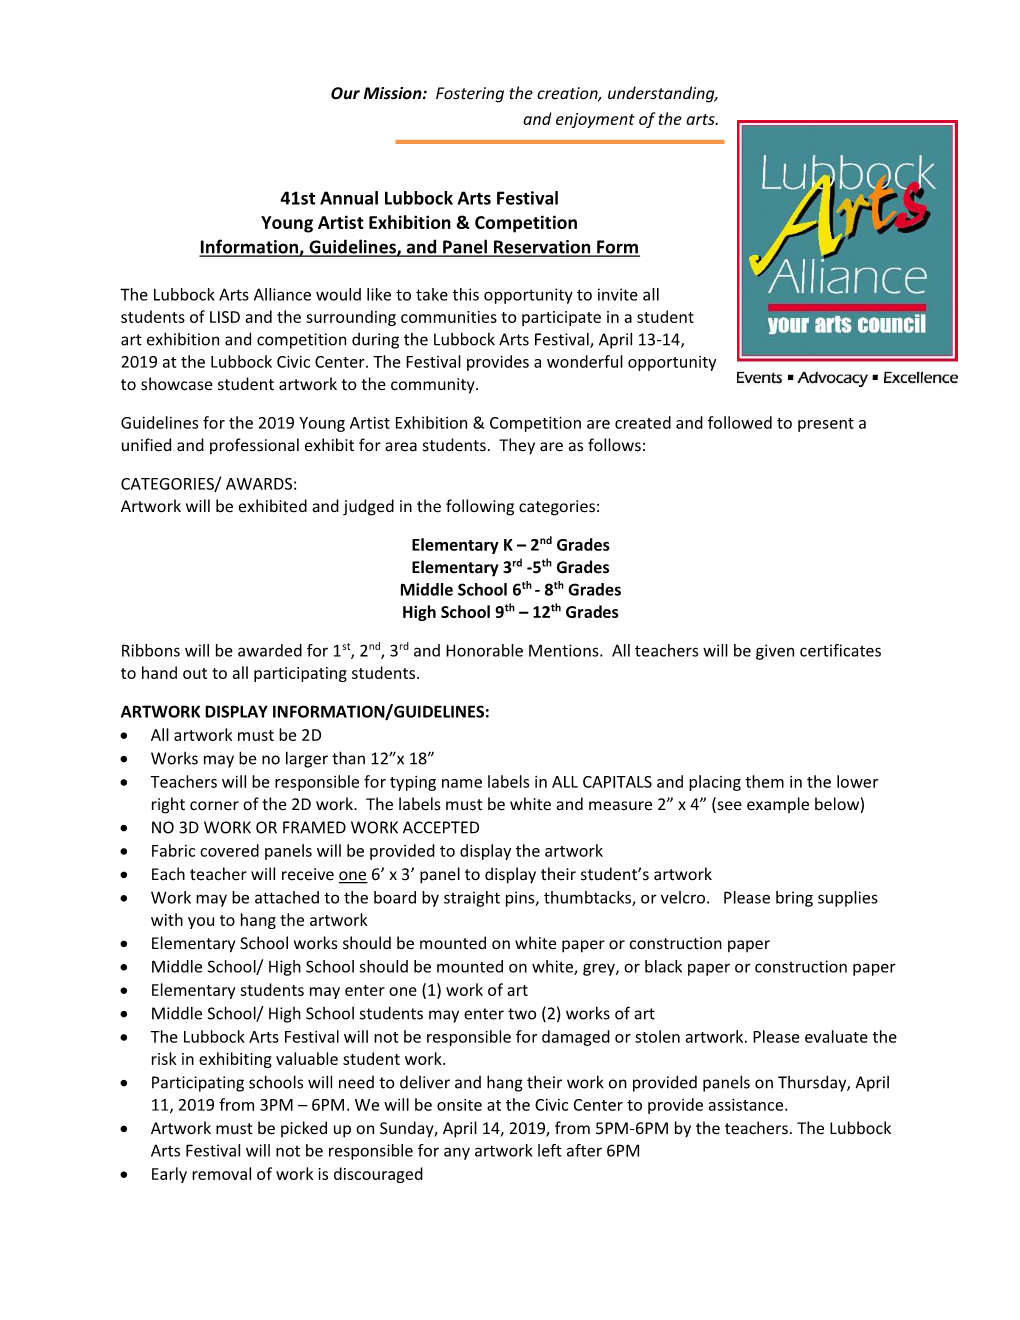 41St Annual Lubbock Arts Festival Young Artist Exhibition & Competition Information, Guidelines, and Panel Reservation Form